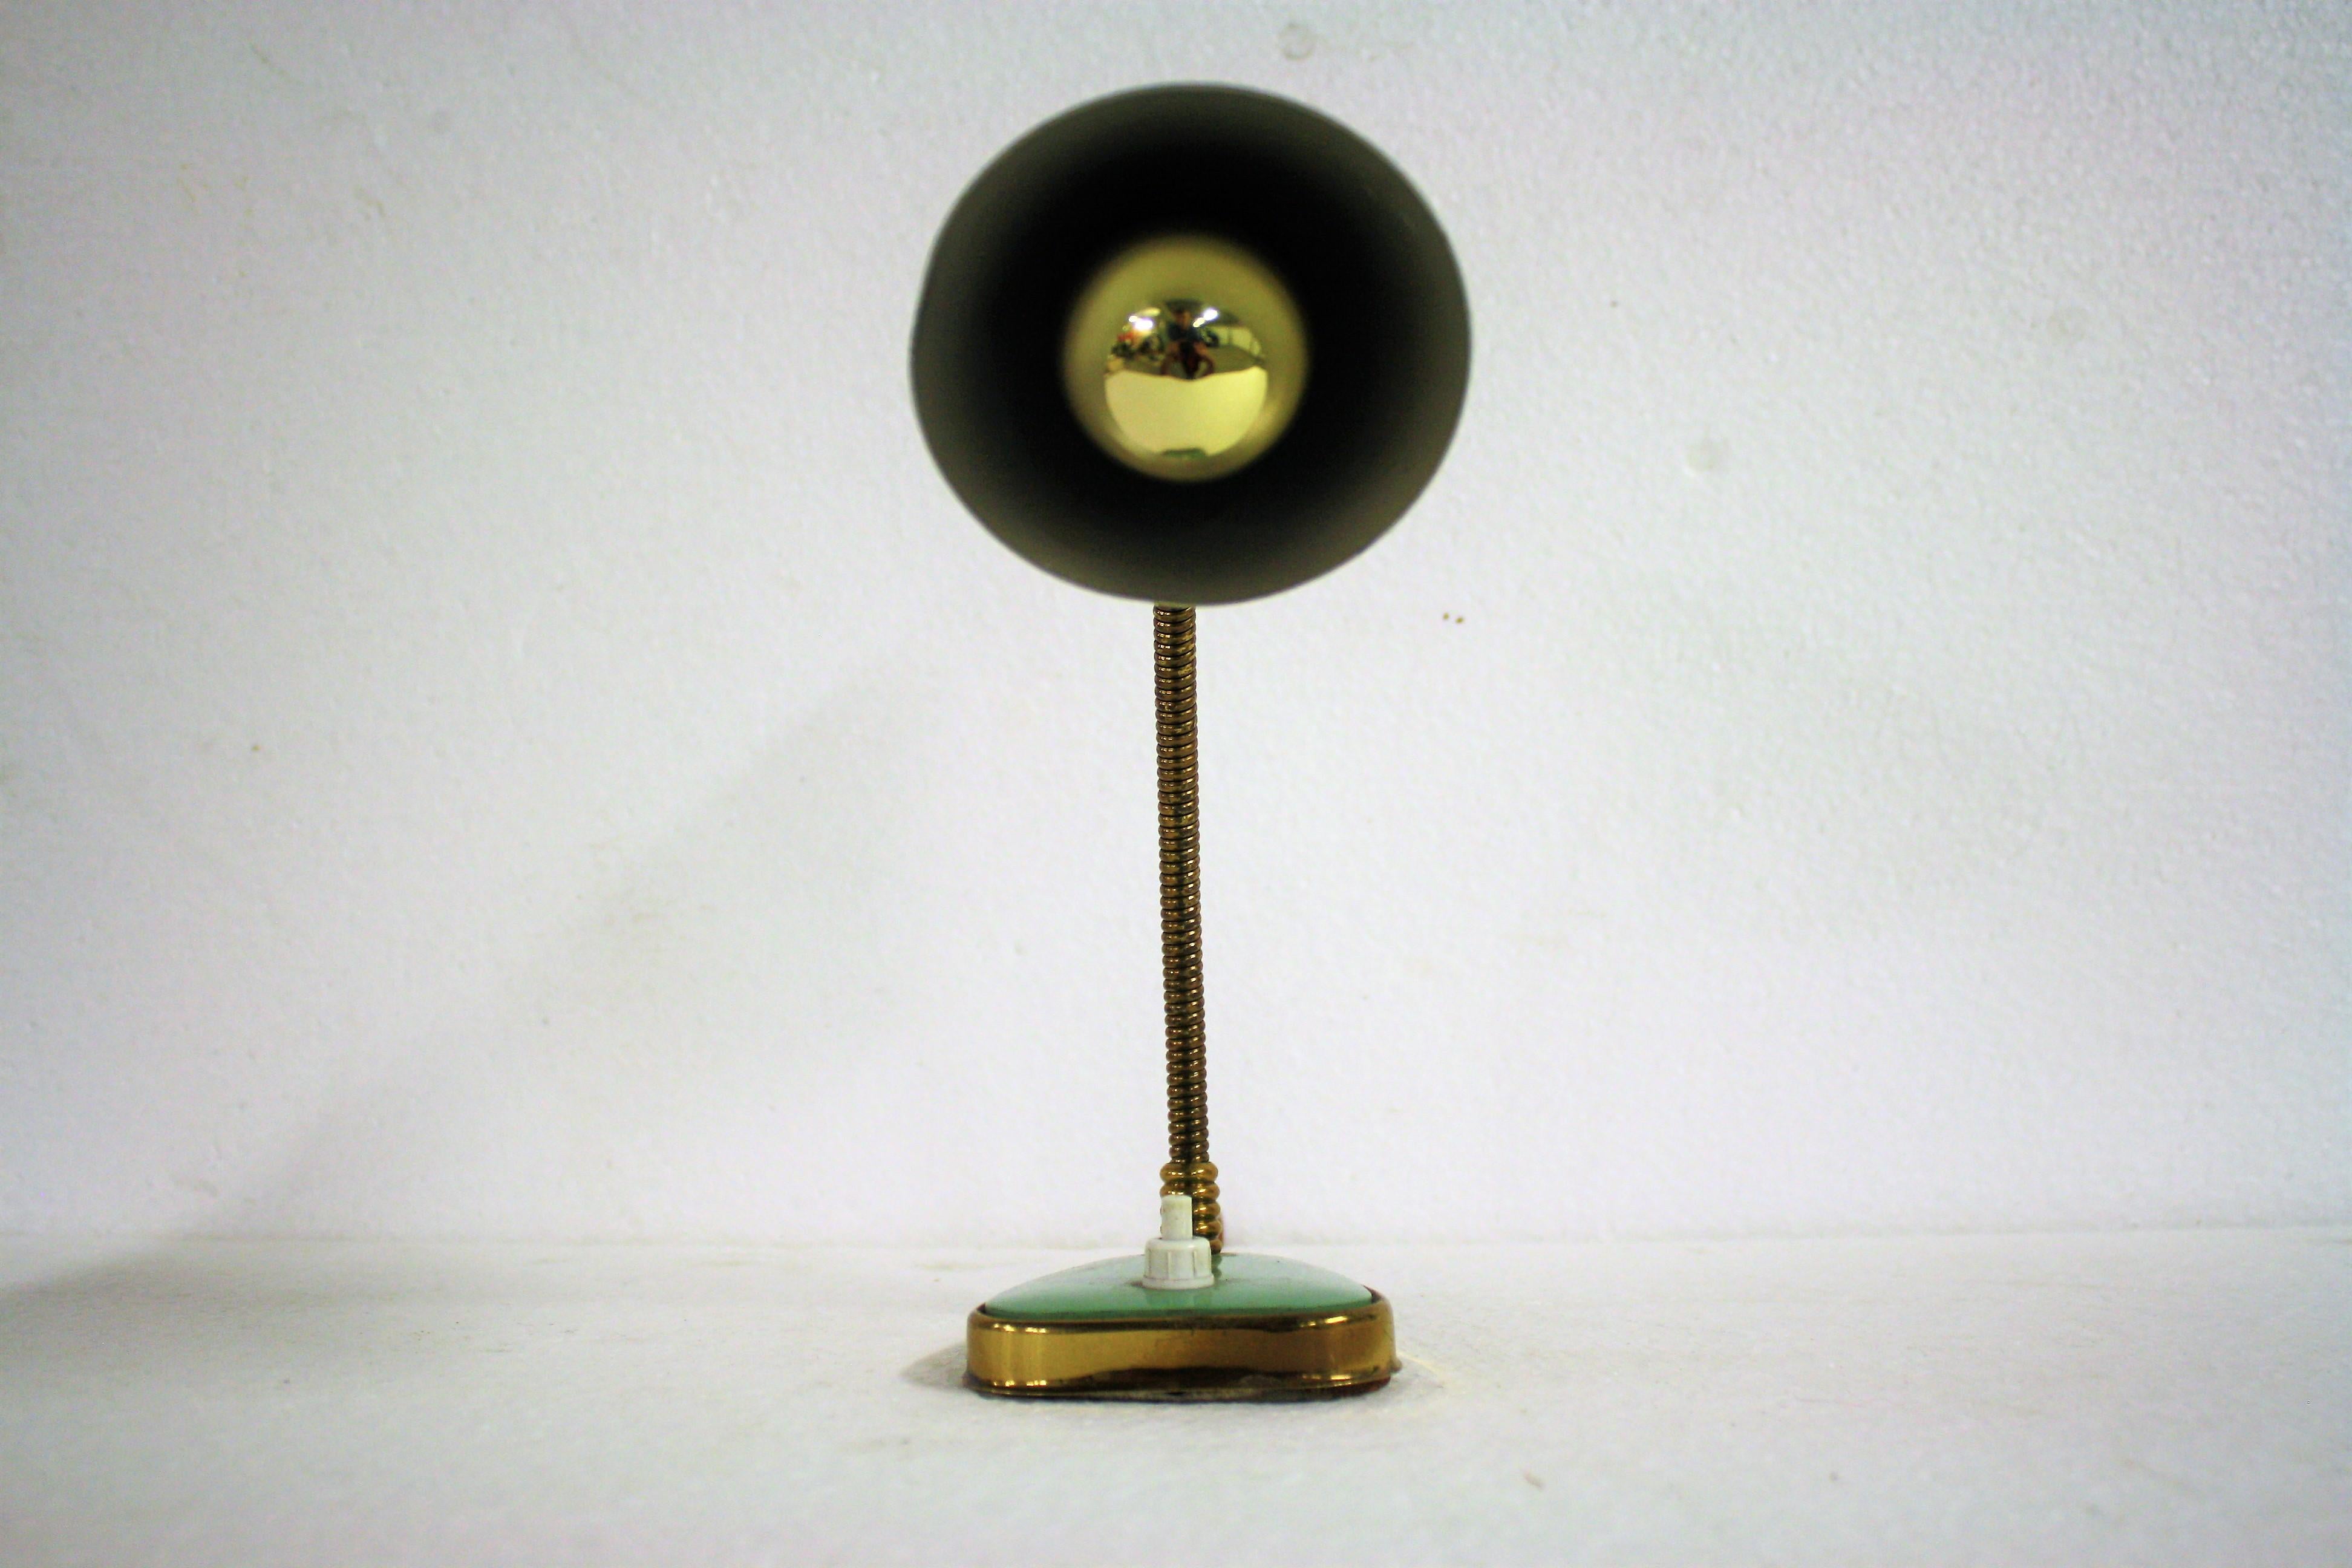 Charming Mid-Century Modern table lamp manufactured by Palma Firenze - Italy

It consists of a fine aluminum lampshade mounted on a flexible brass arm.

The base has a brass finish as well.

The lamp is in a beautiful used condition.

This